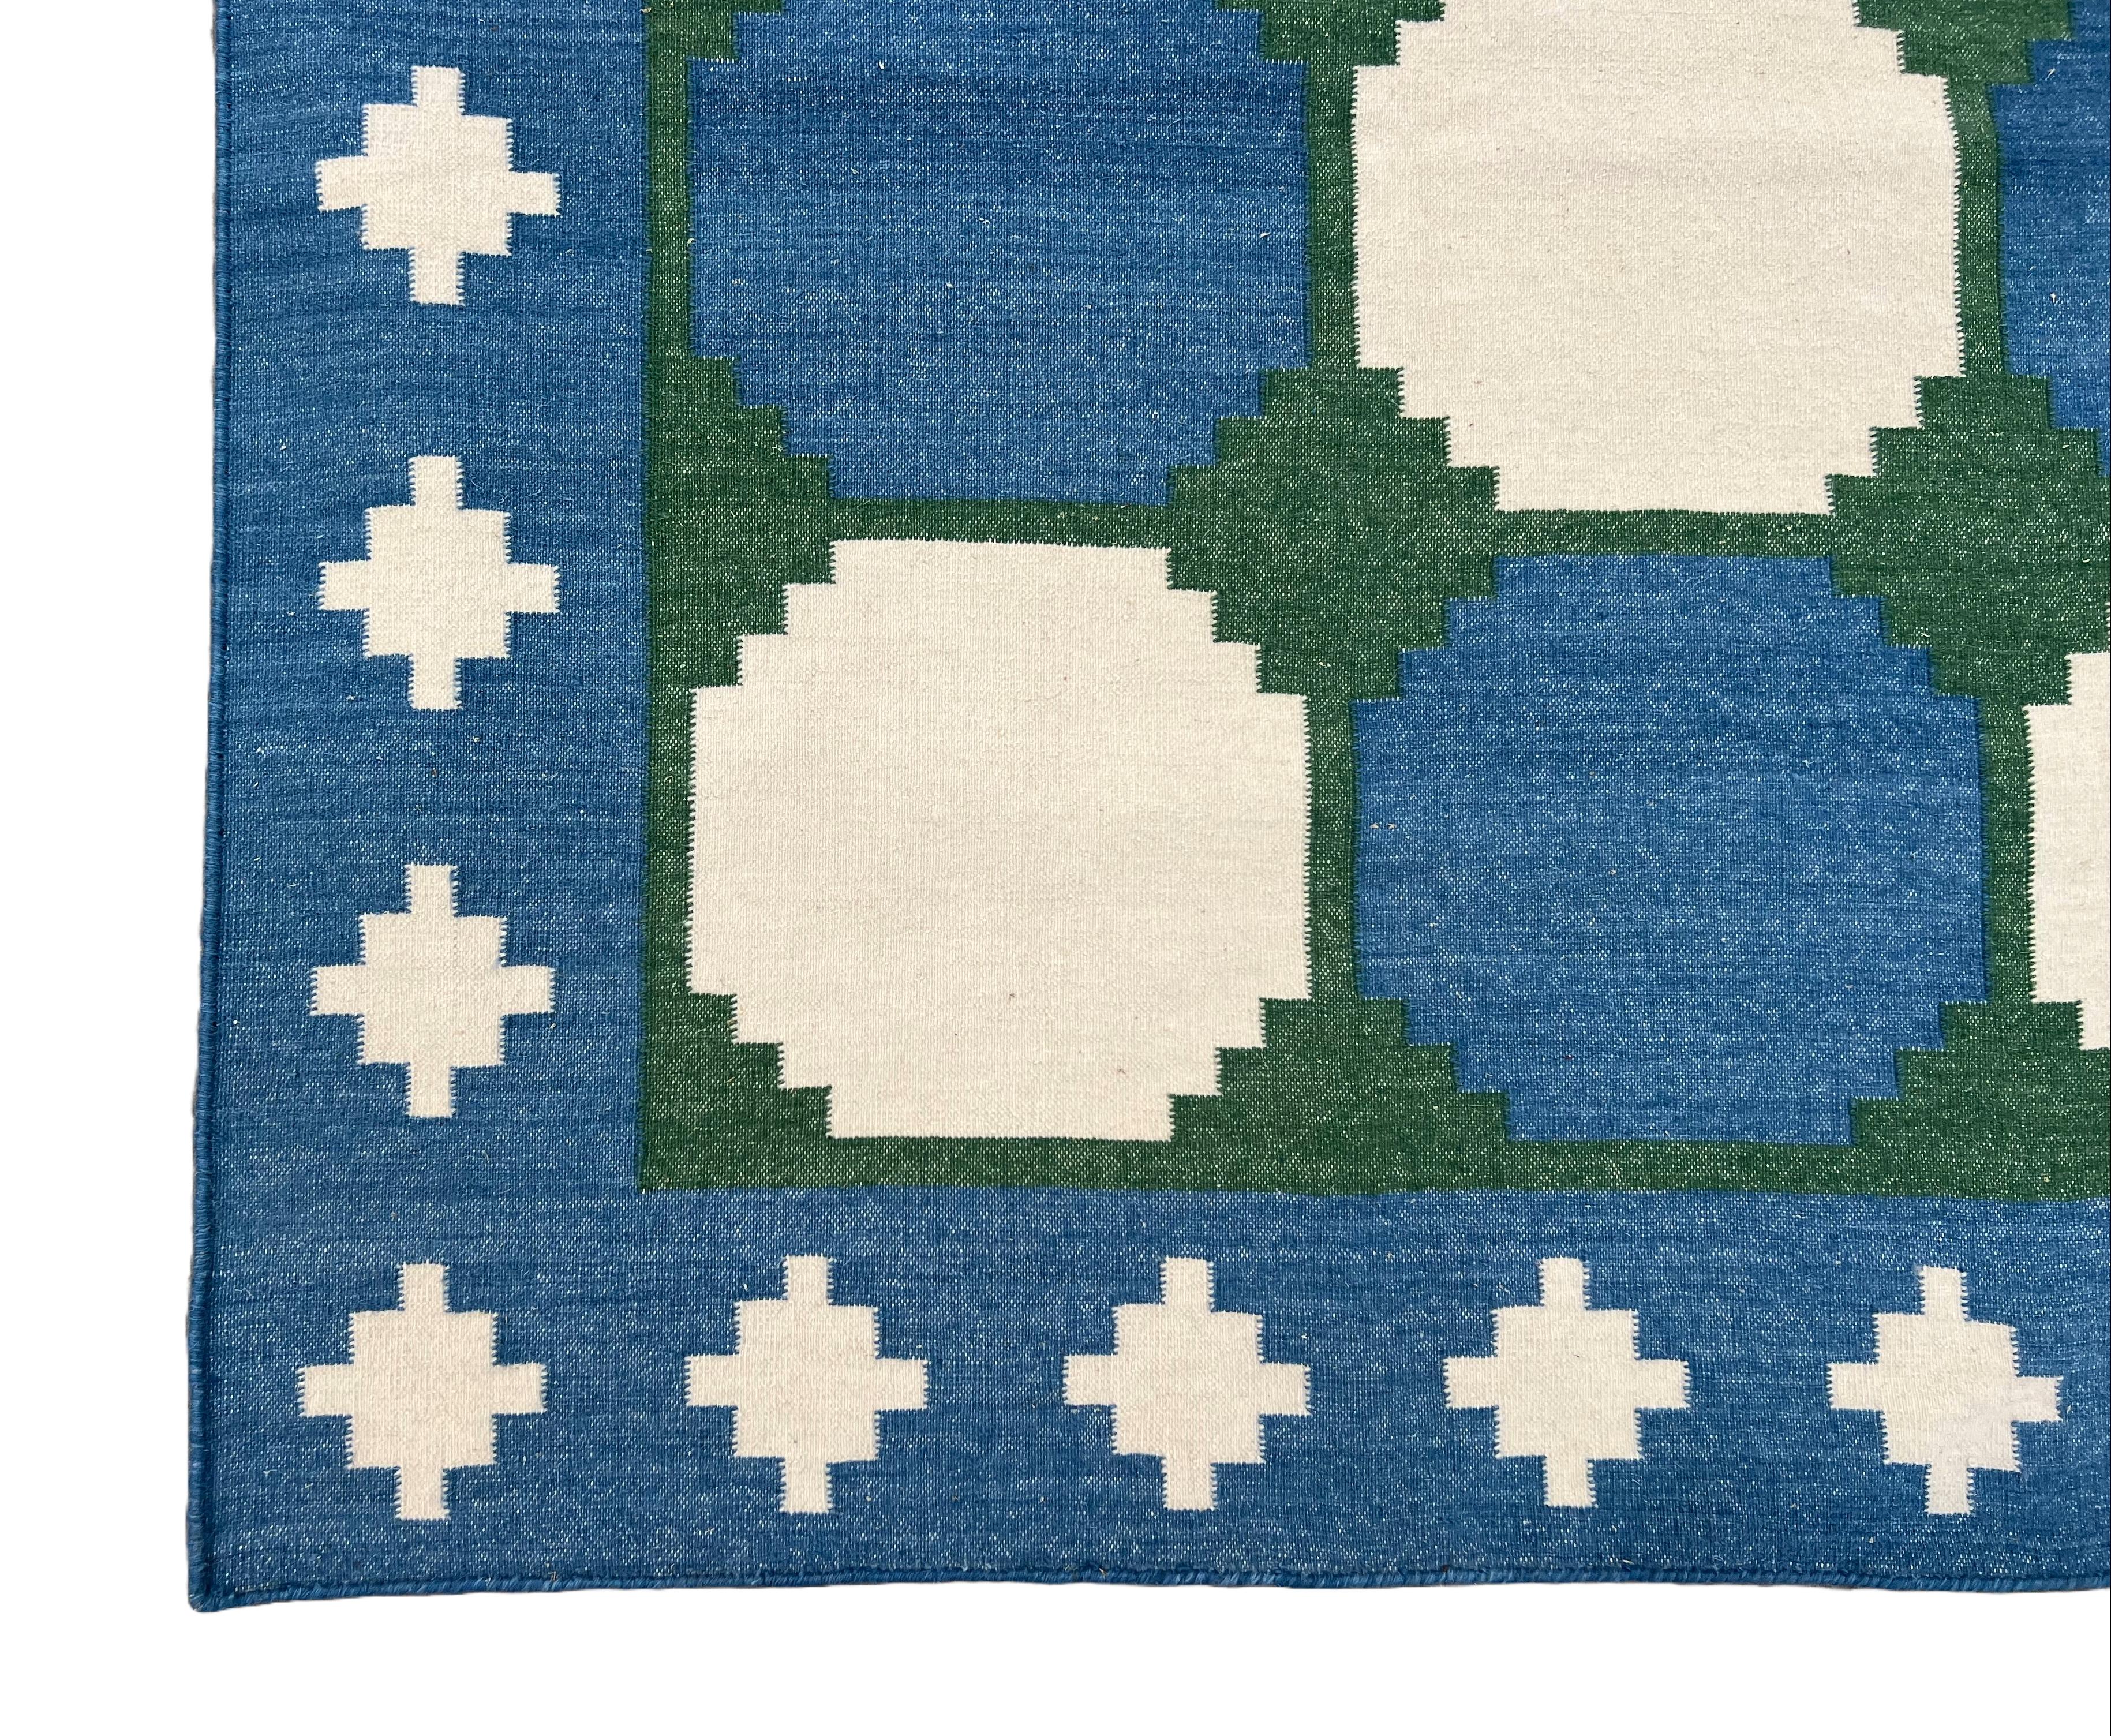 Hand-Woven Handmade Woolen Area Flat Weave Rug, 8x10 Blue And Green Tile Patterned Dhurrie For Sale